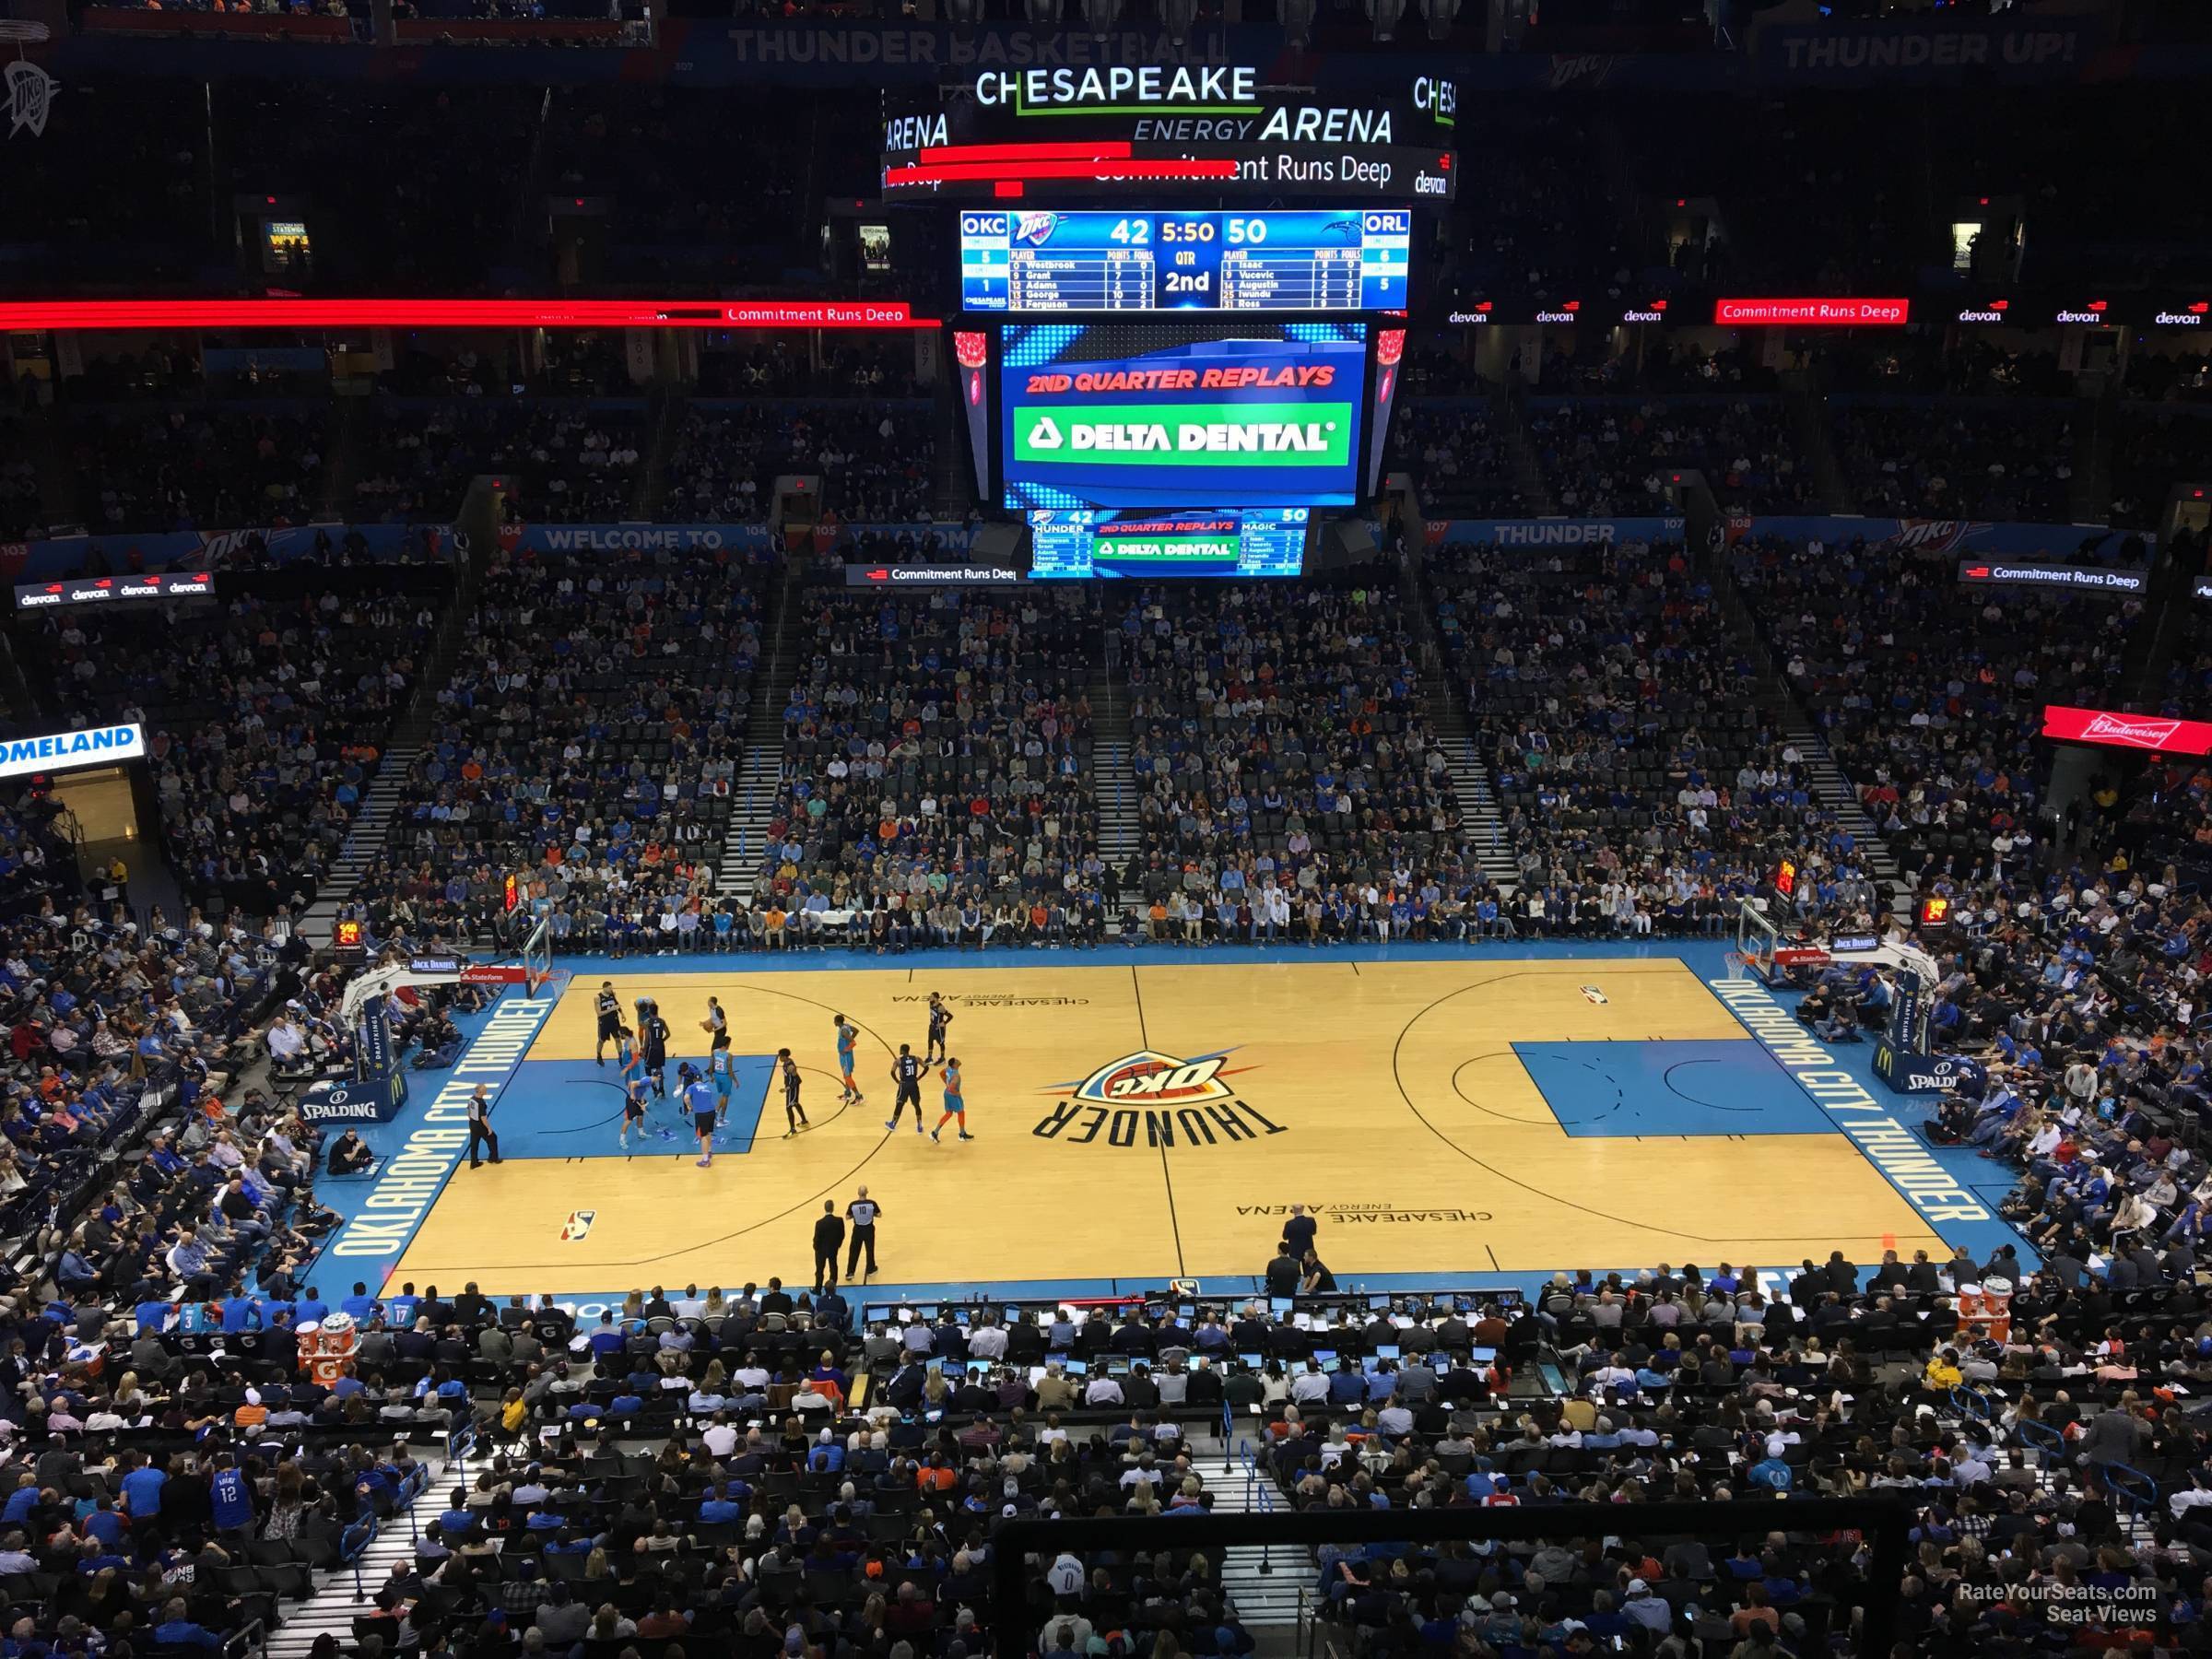 section 324, row a seat view  for basketball - paycom center